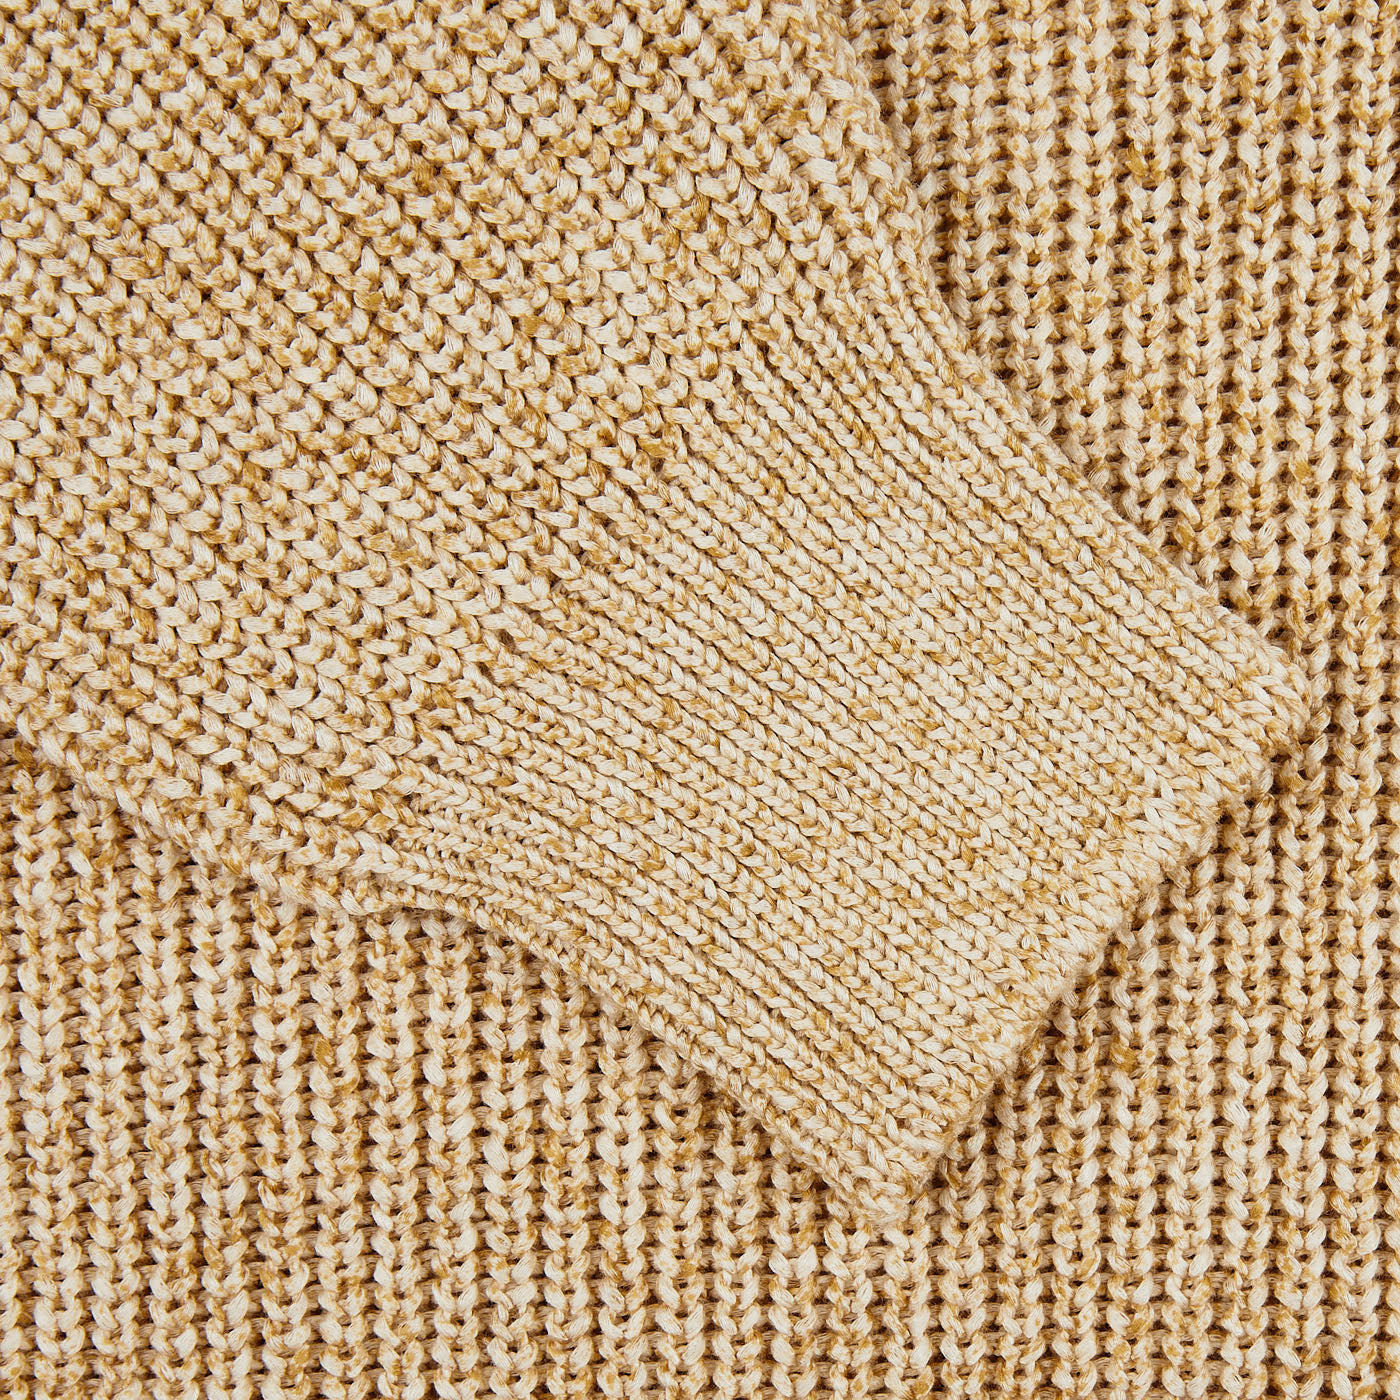 A close up image of an Oat Beige Rib Stitch Cotton 1/4 Zip Sweater by Gran Sasso.